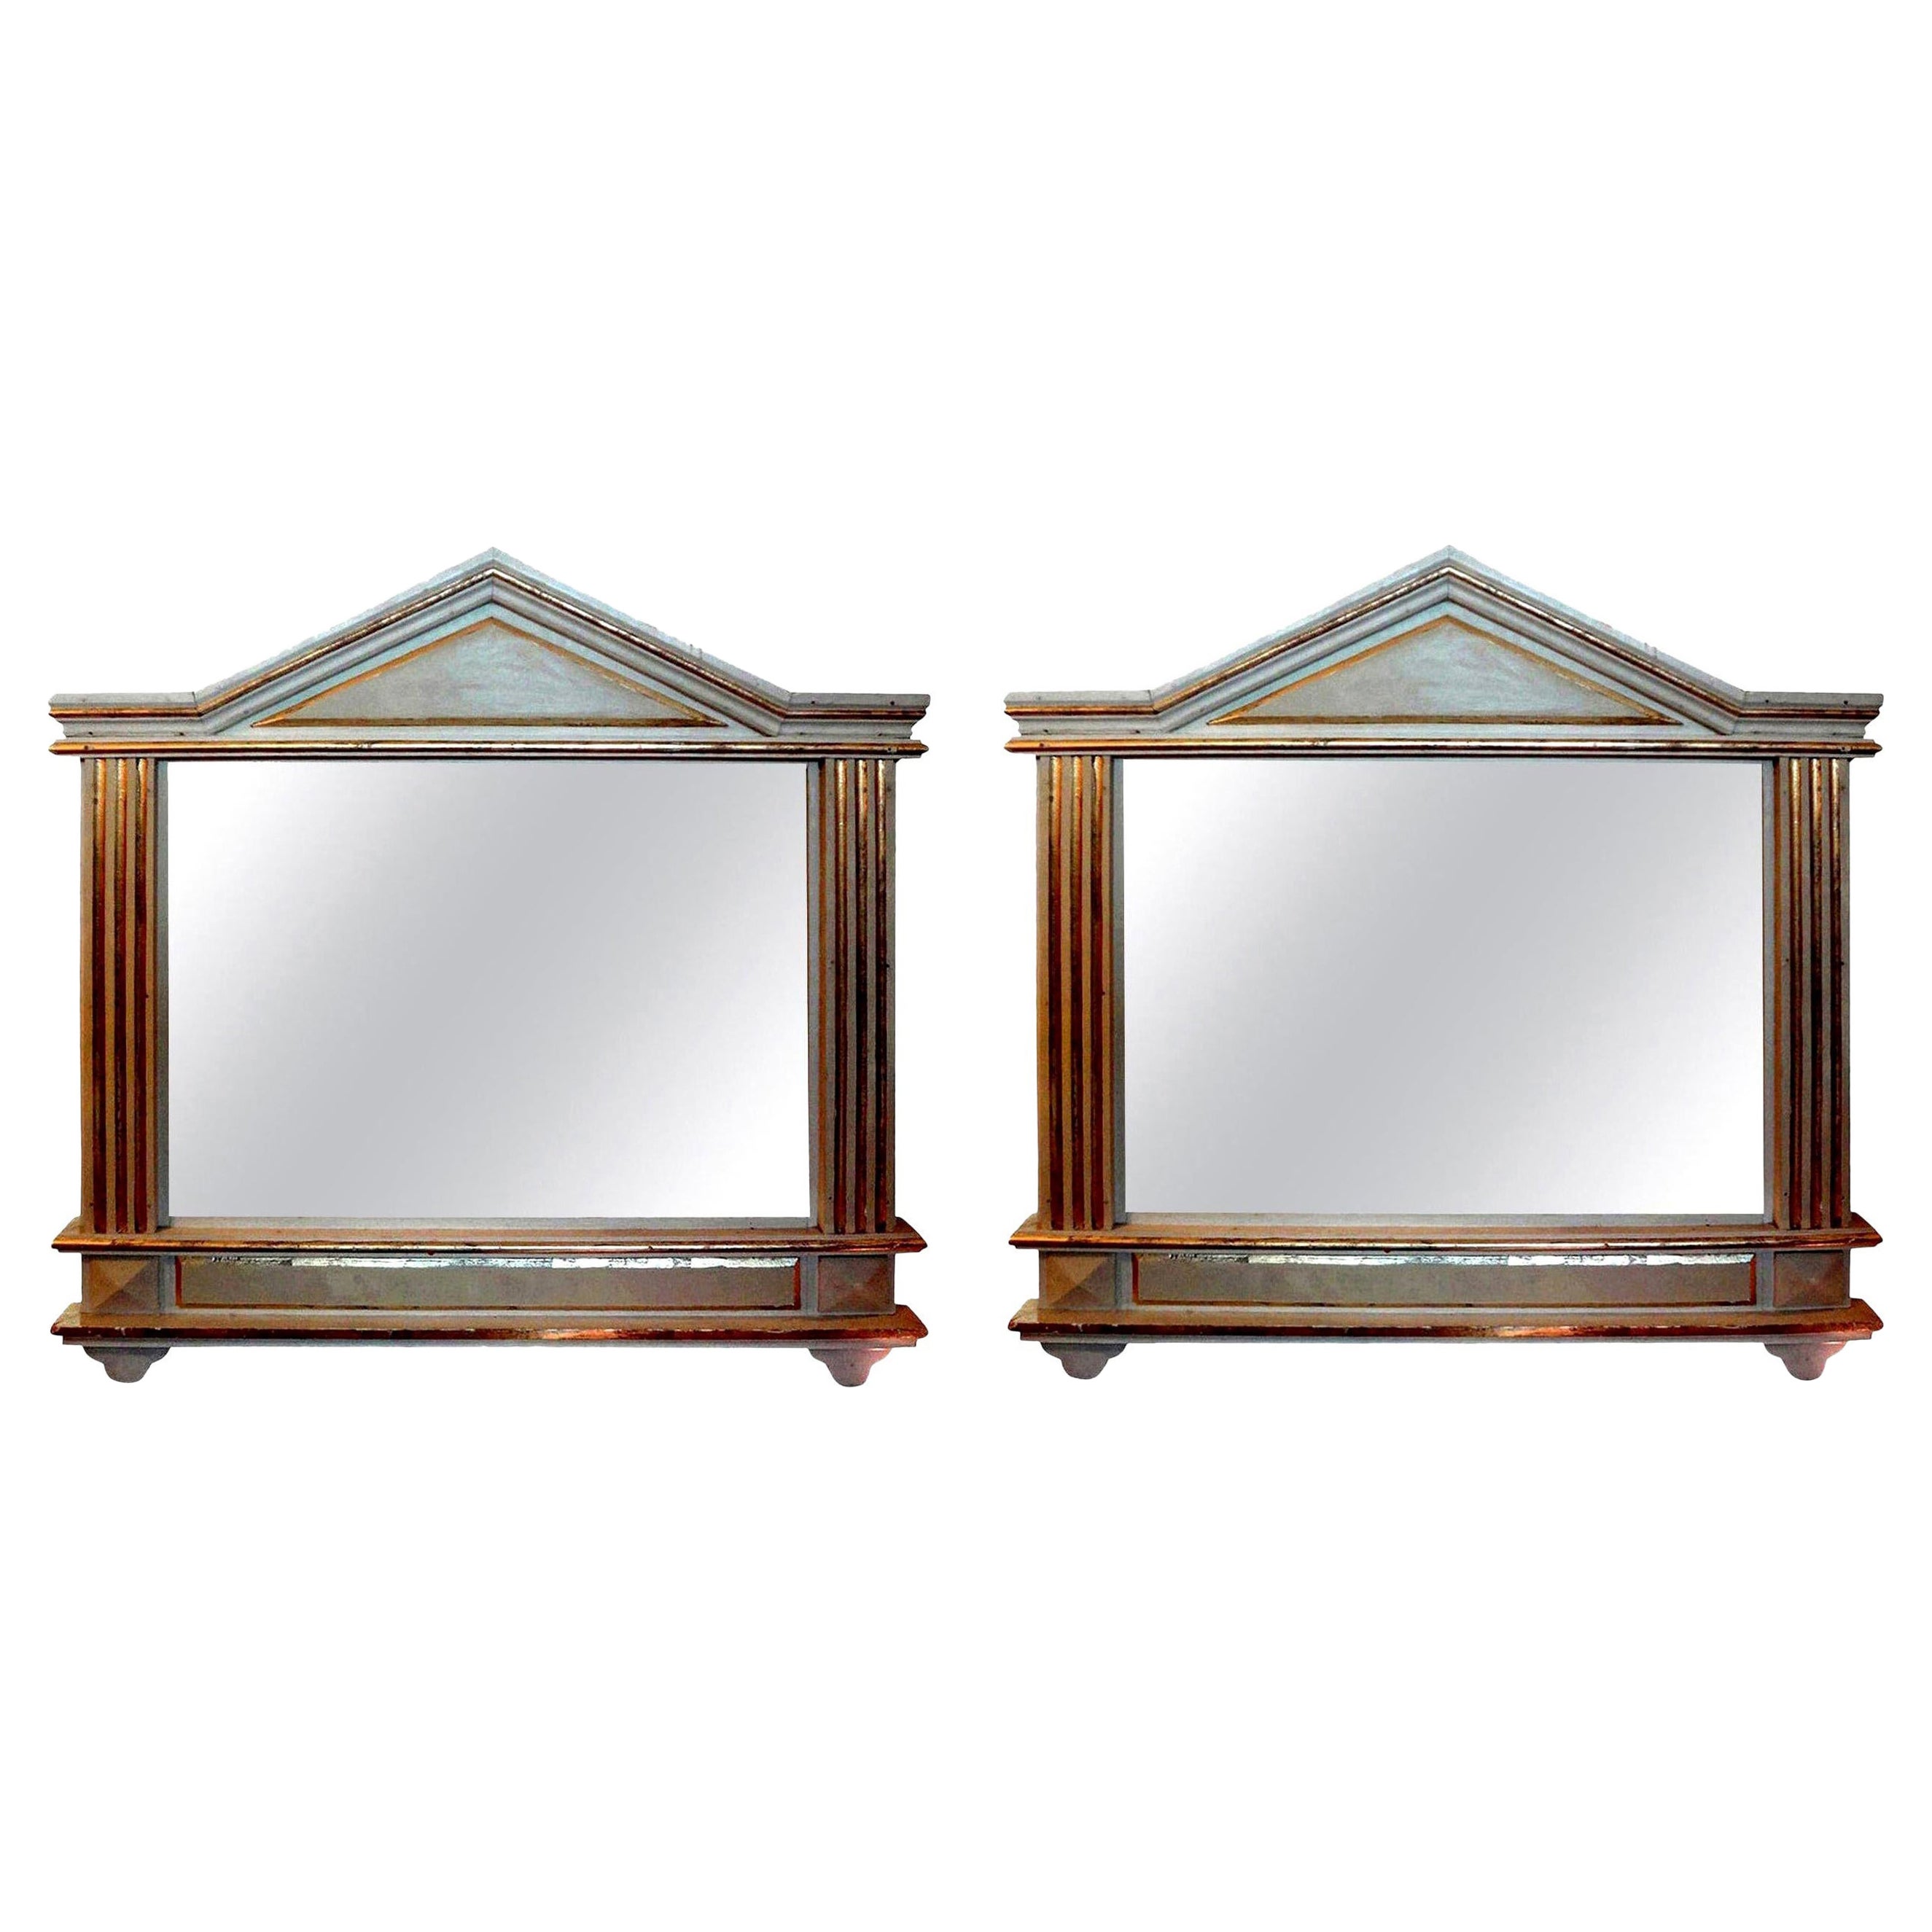 Pair of Italian Neoclassical Style Mirrors, Painted and Giltwood